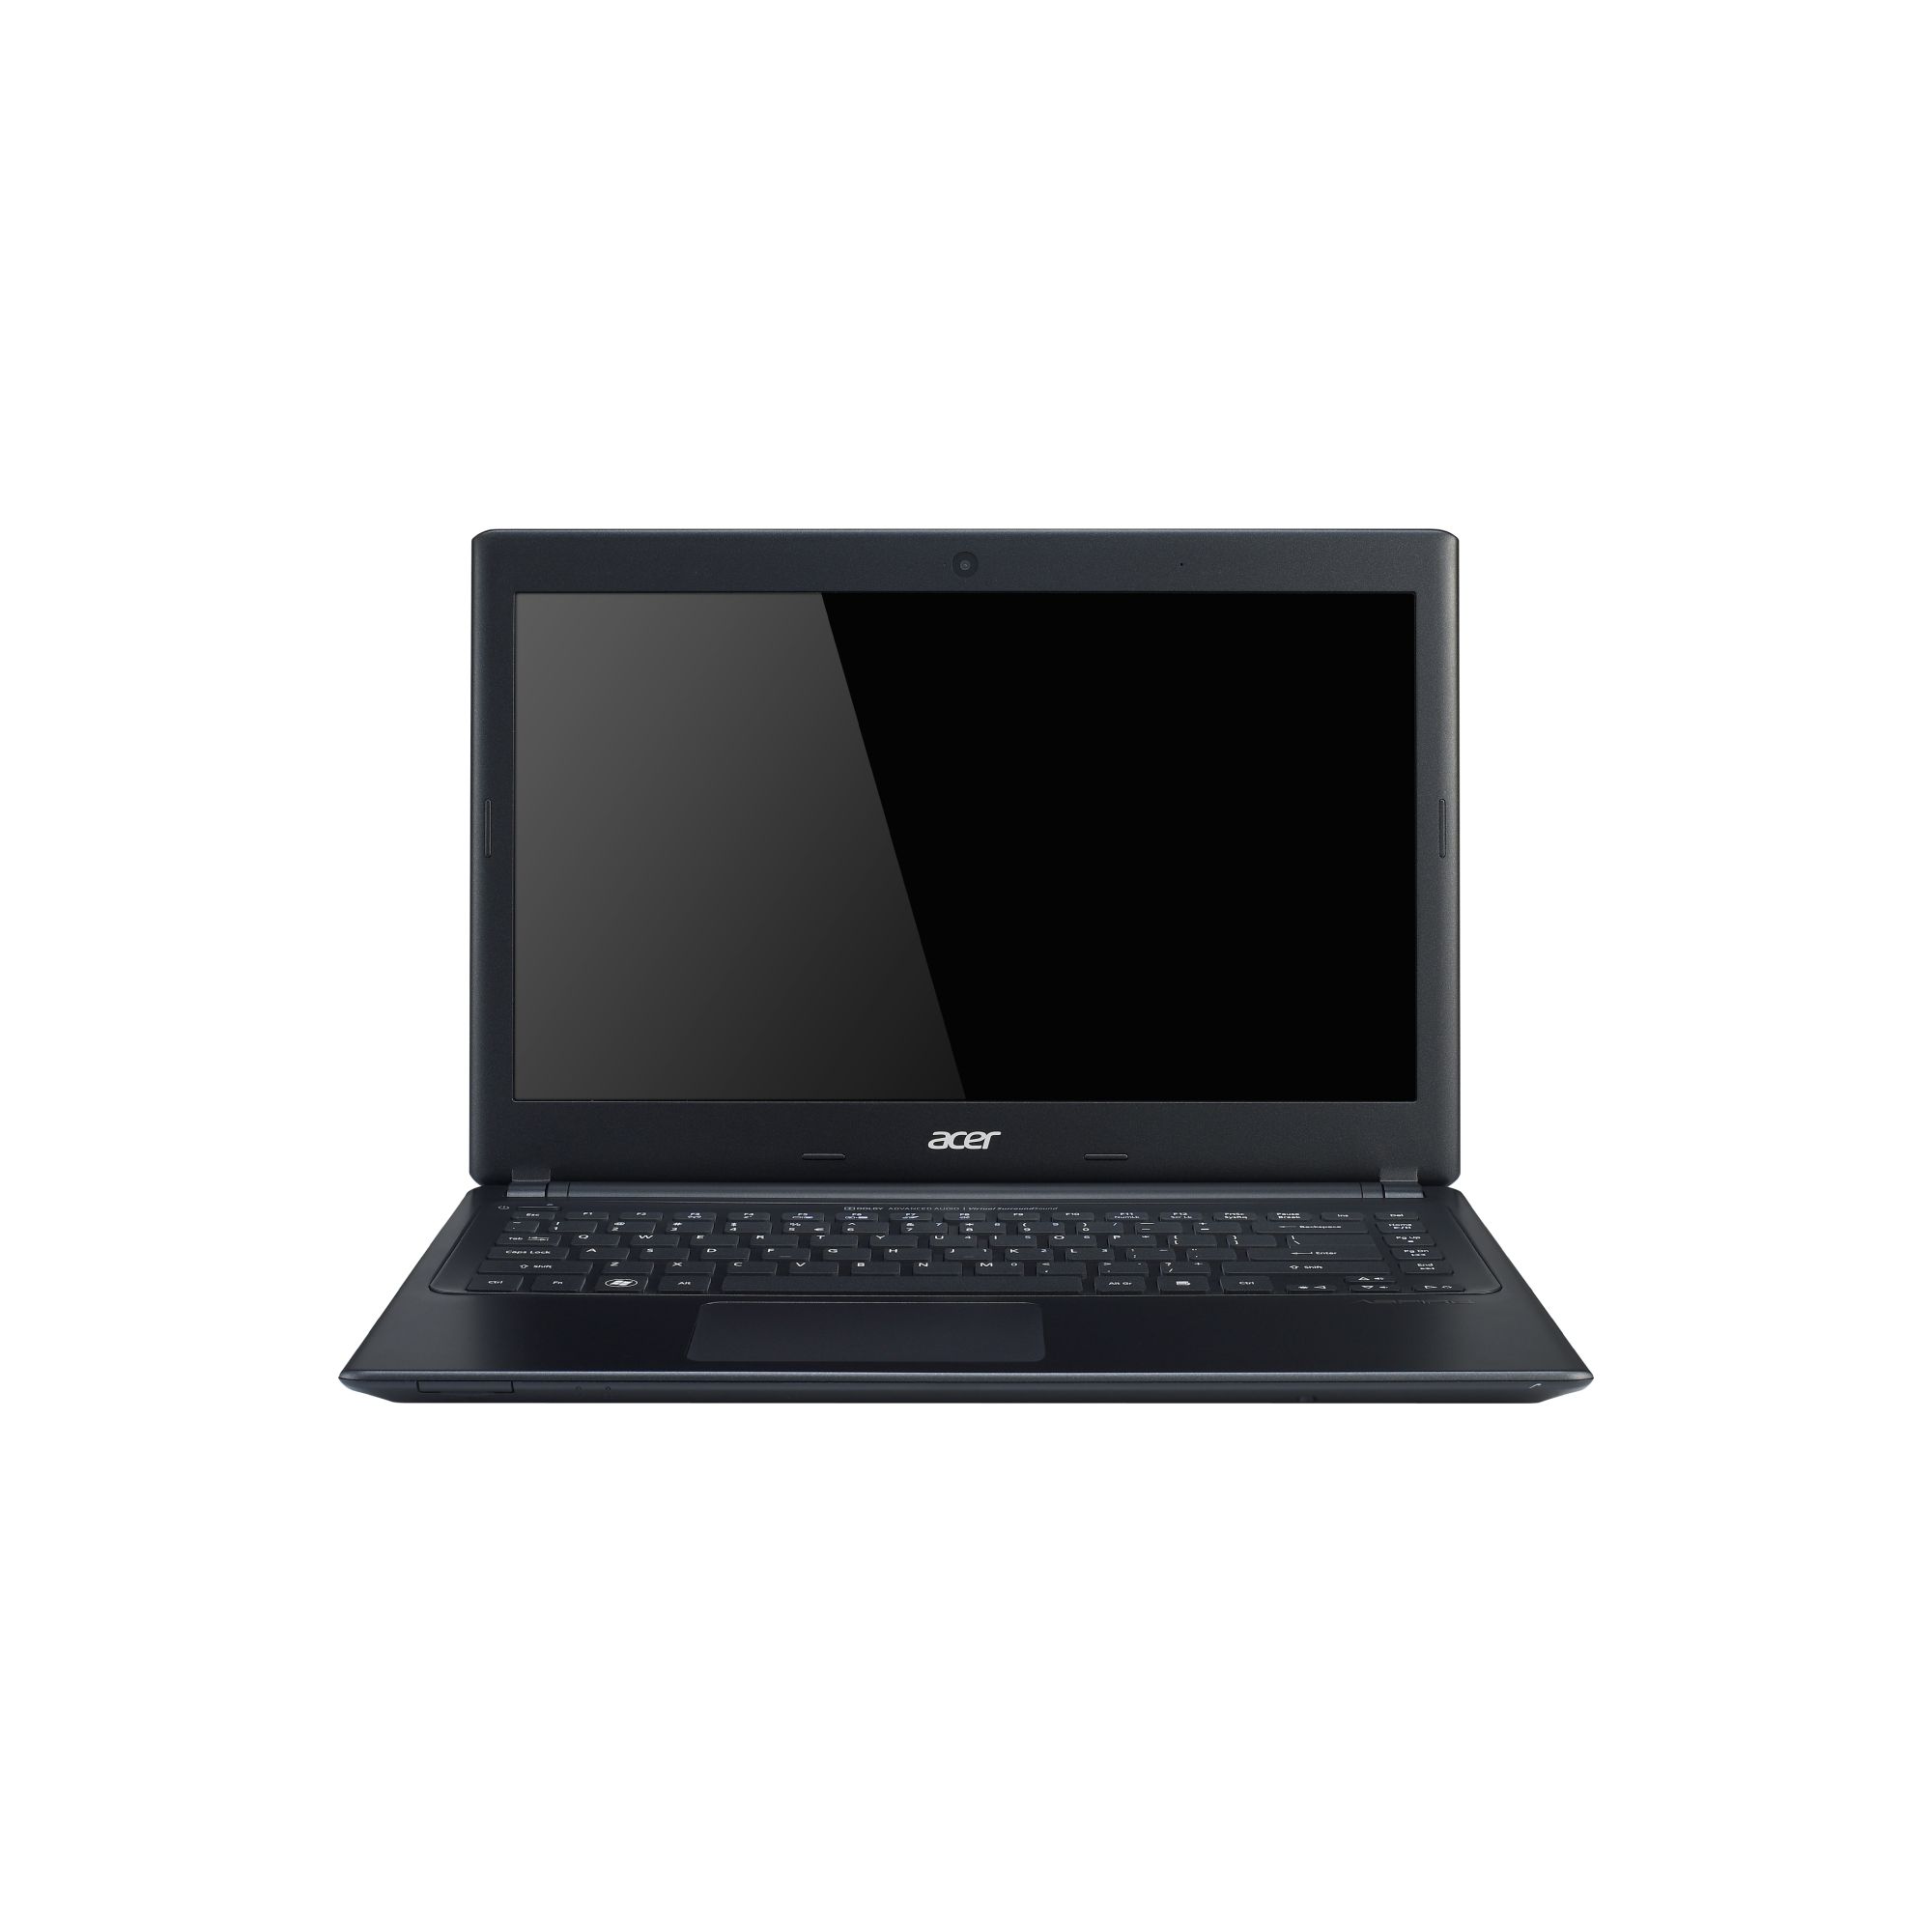 Acer TMP643-M i5-3230M 500 GB 14 inch Win 7 Laptop